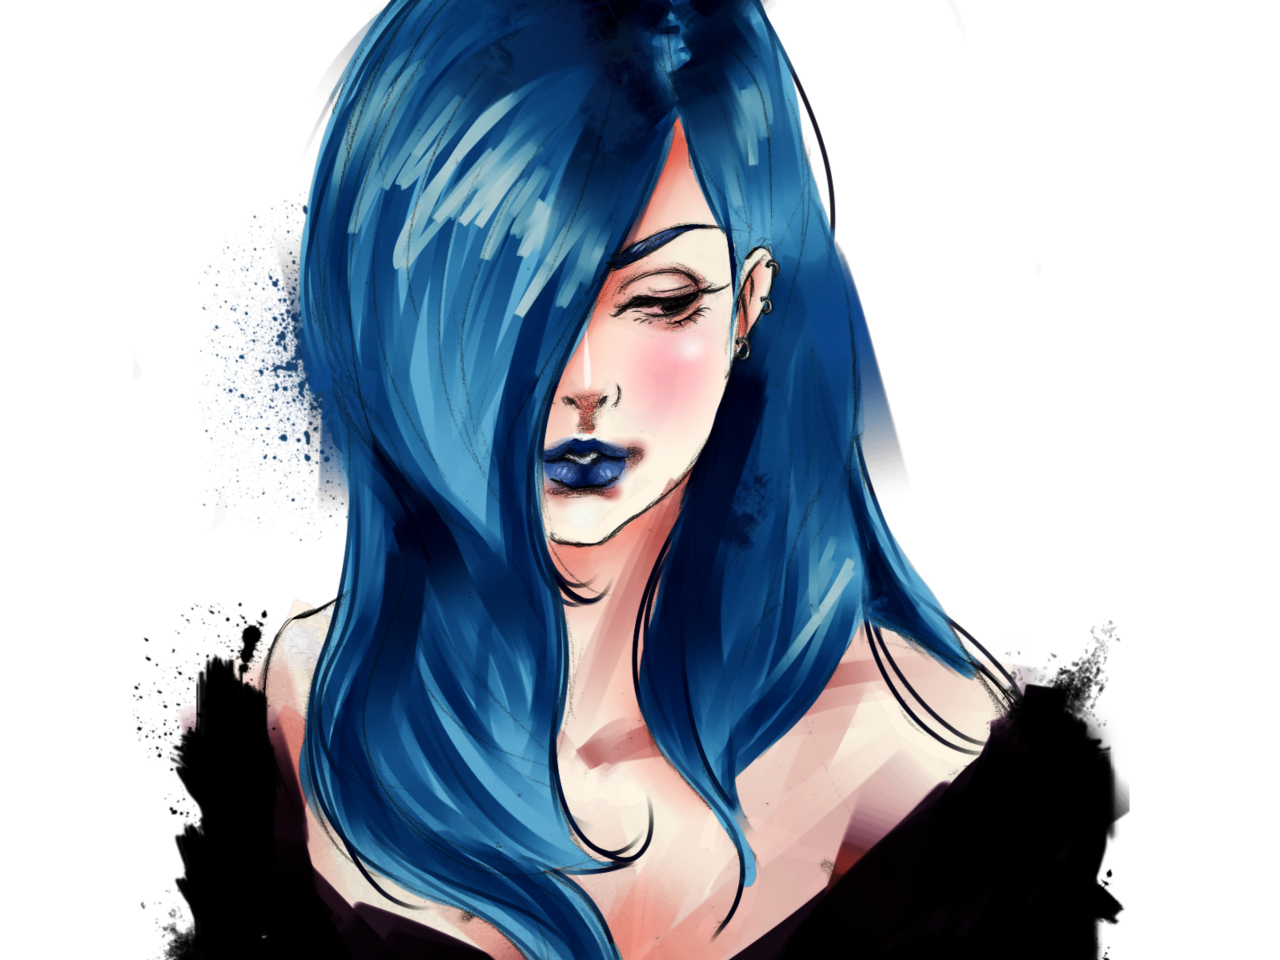 Girl With Blue Hair Painting screenshot #1 1280x960